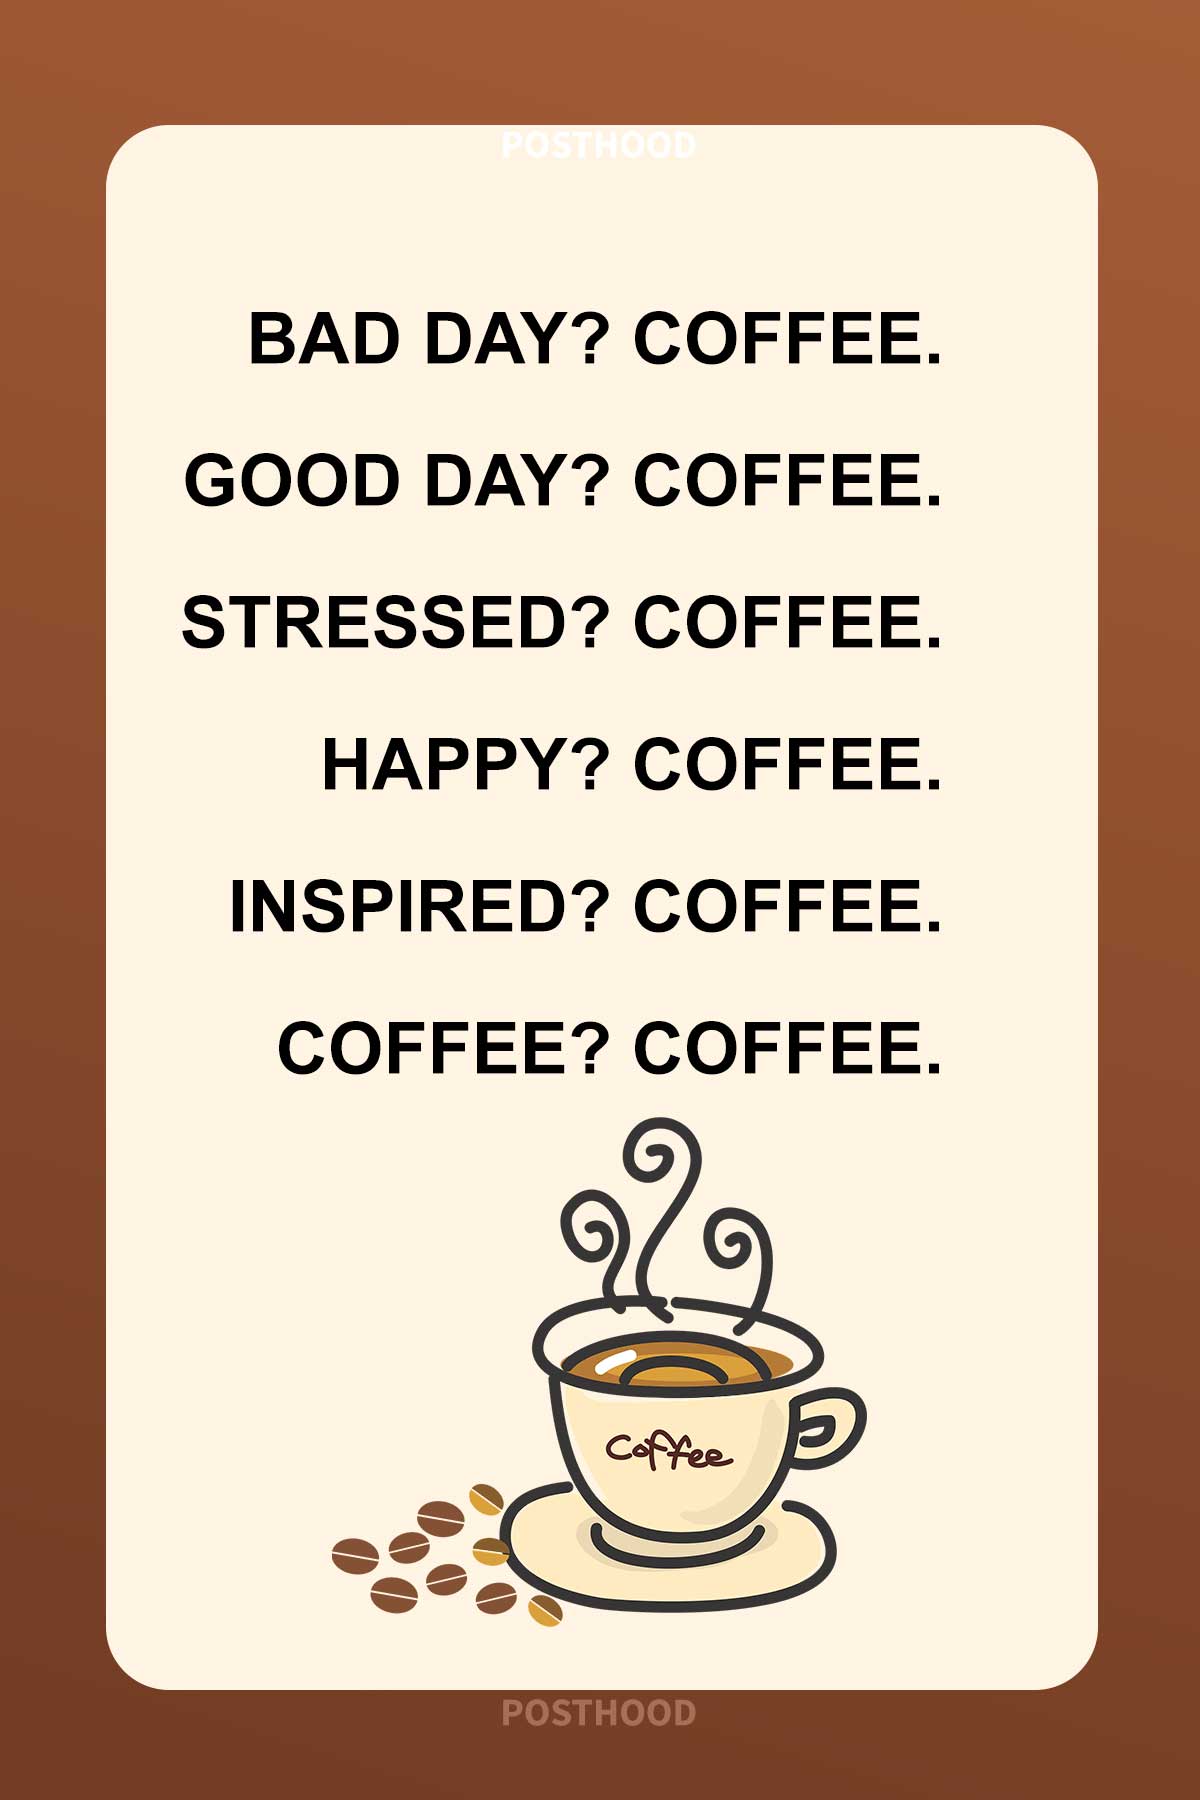 80 Best coffee quotes to fit your every mood swing. A great collection of humor coffee quotes that will go perfectly with your caffeinated vibes.